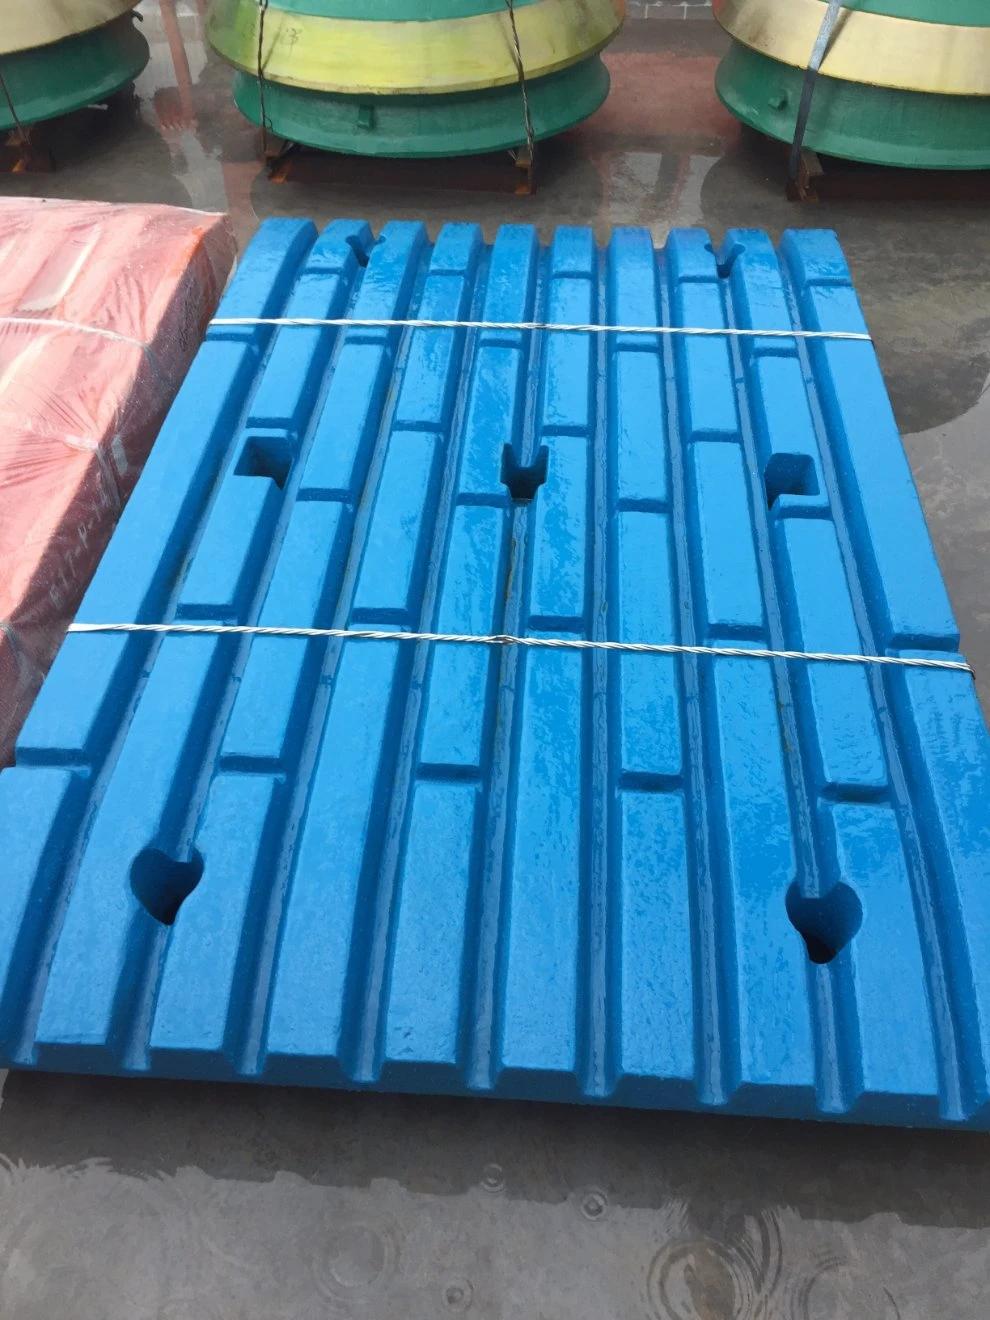 High Quality Impact Liner Blow Bar for Impact Crusher